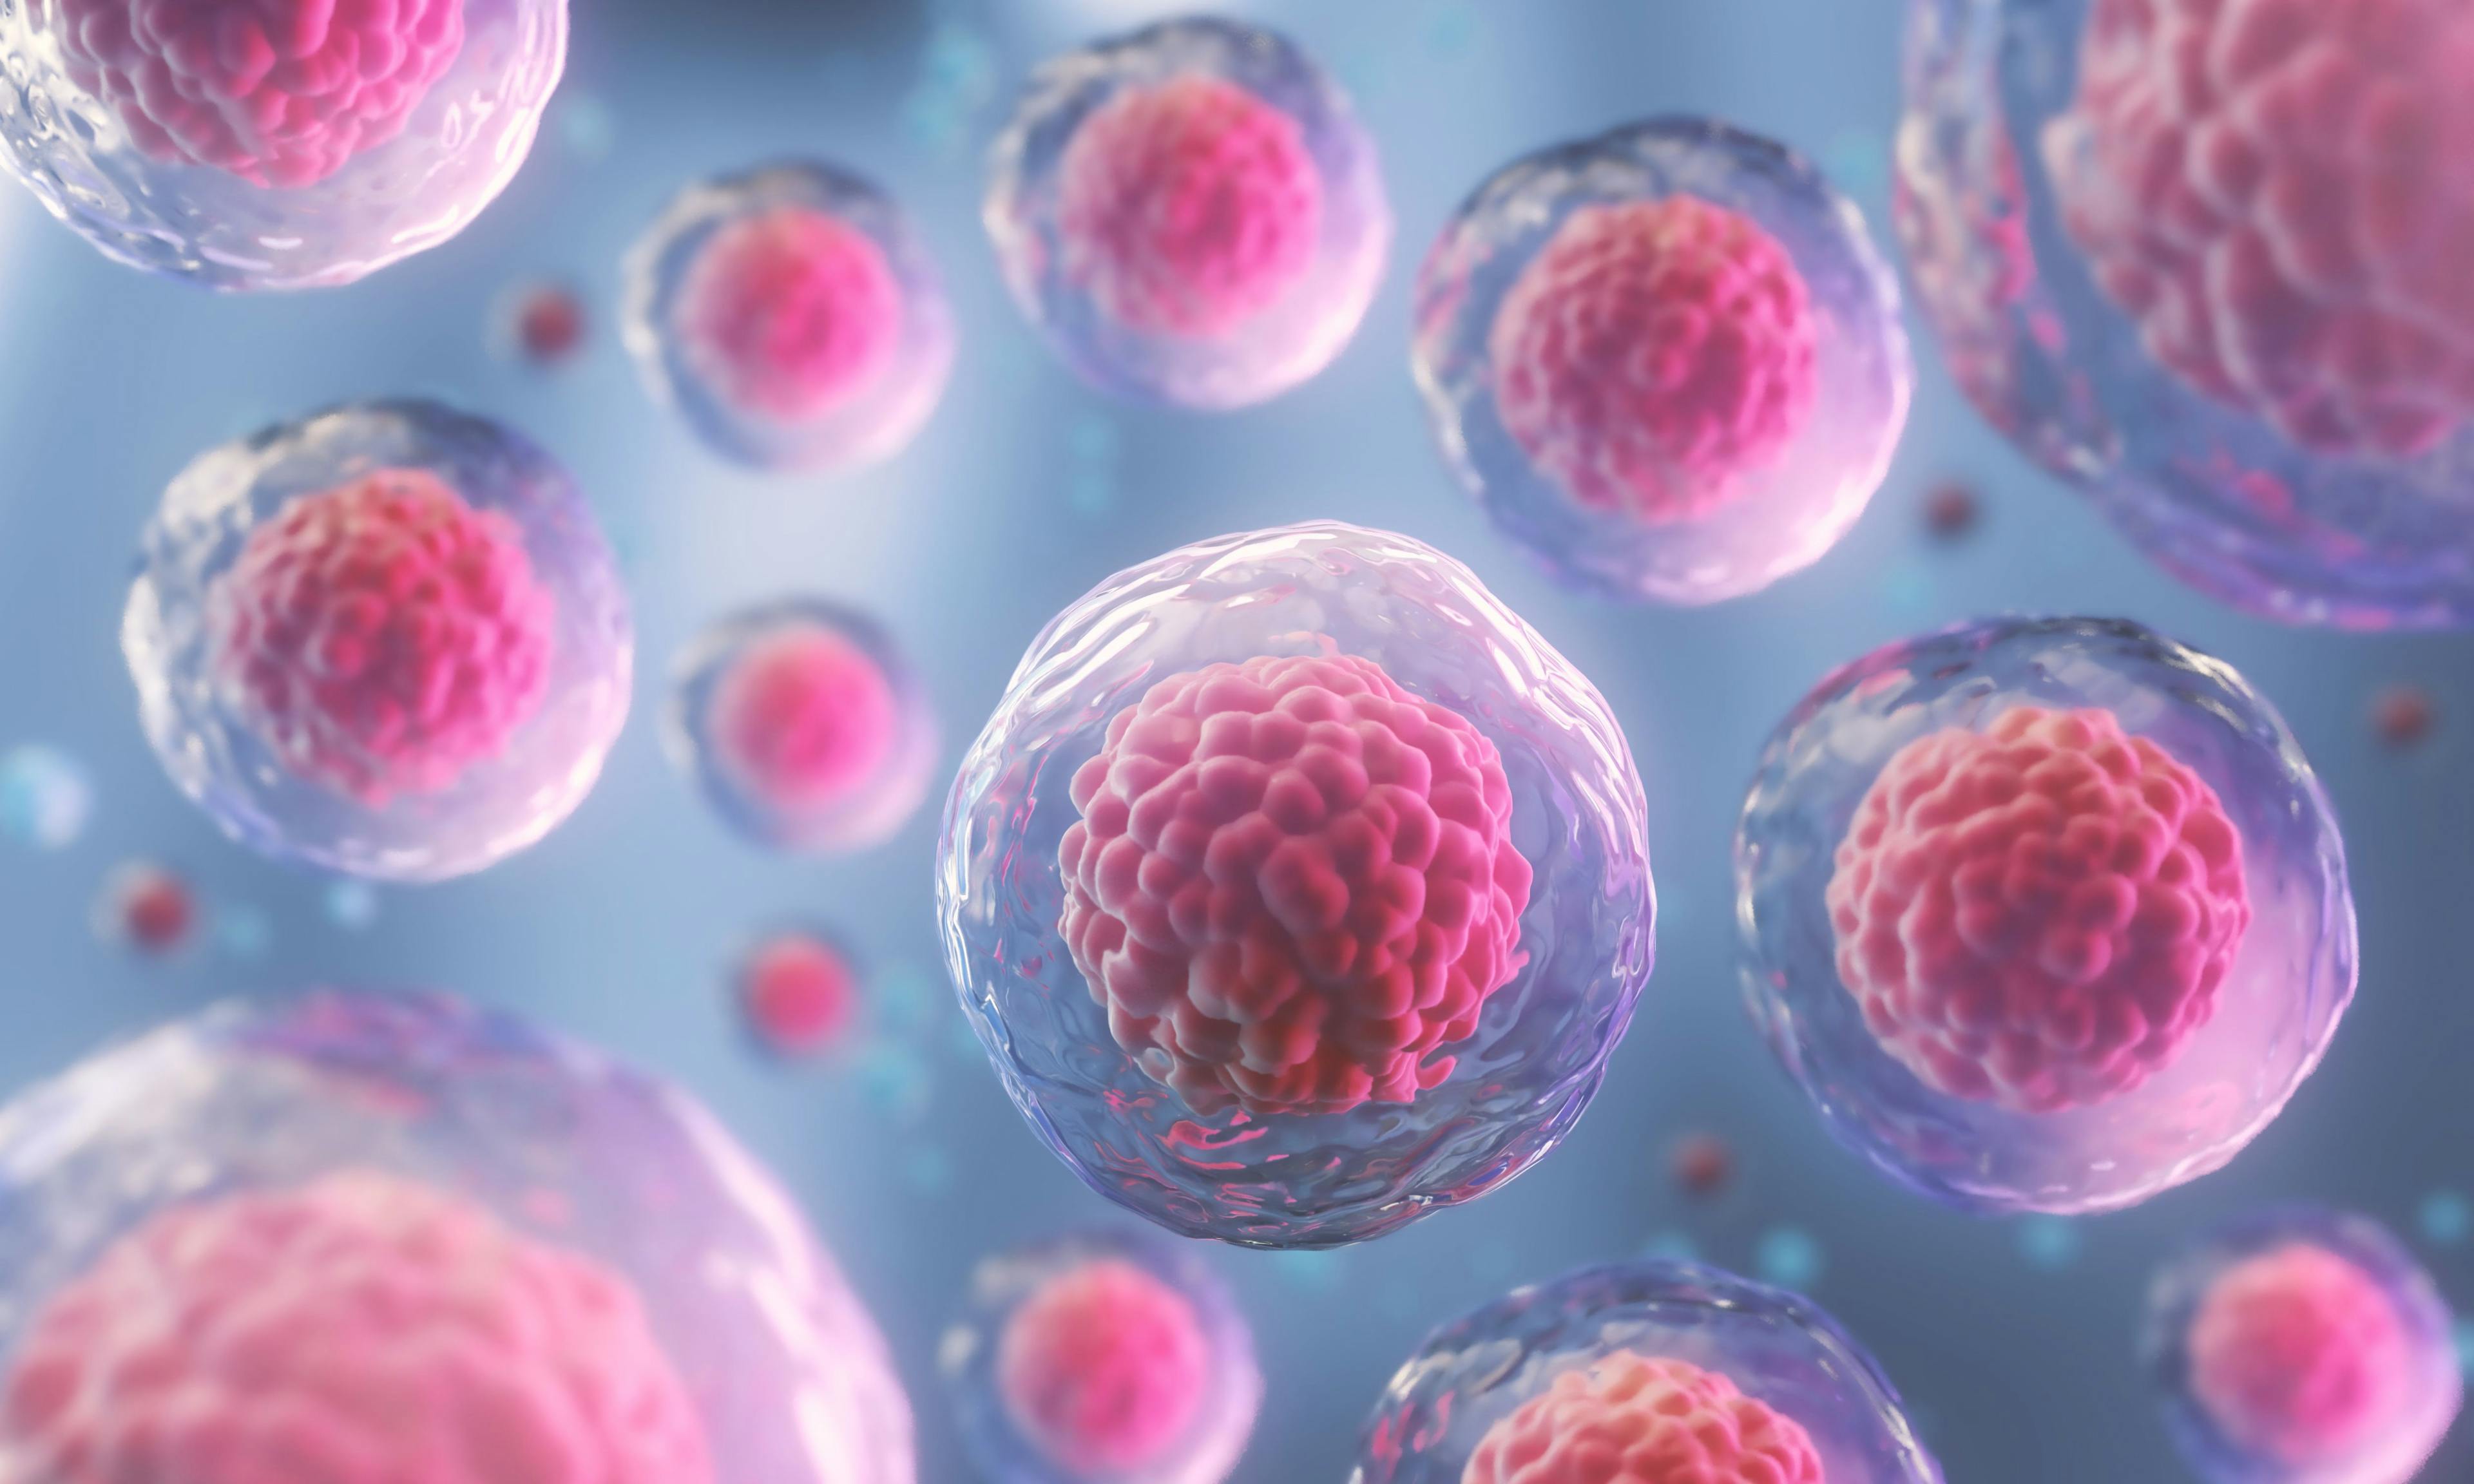 Stem Cells Show Promise for Nonhealing Diabetic Foot Ulcers in Phase 1 Trial